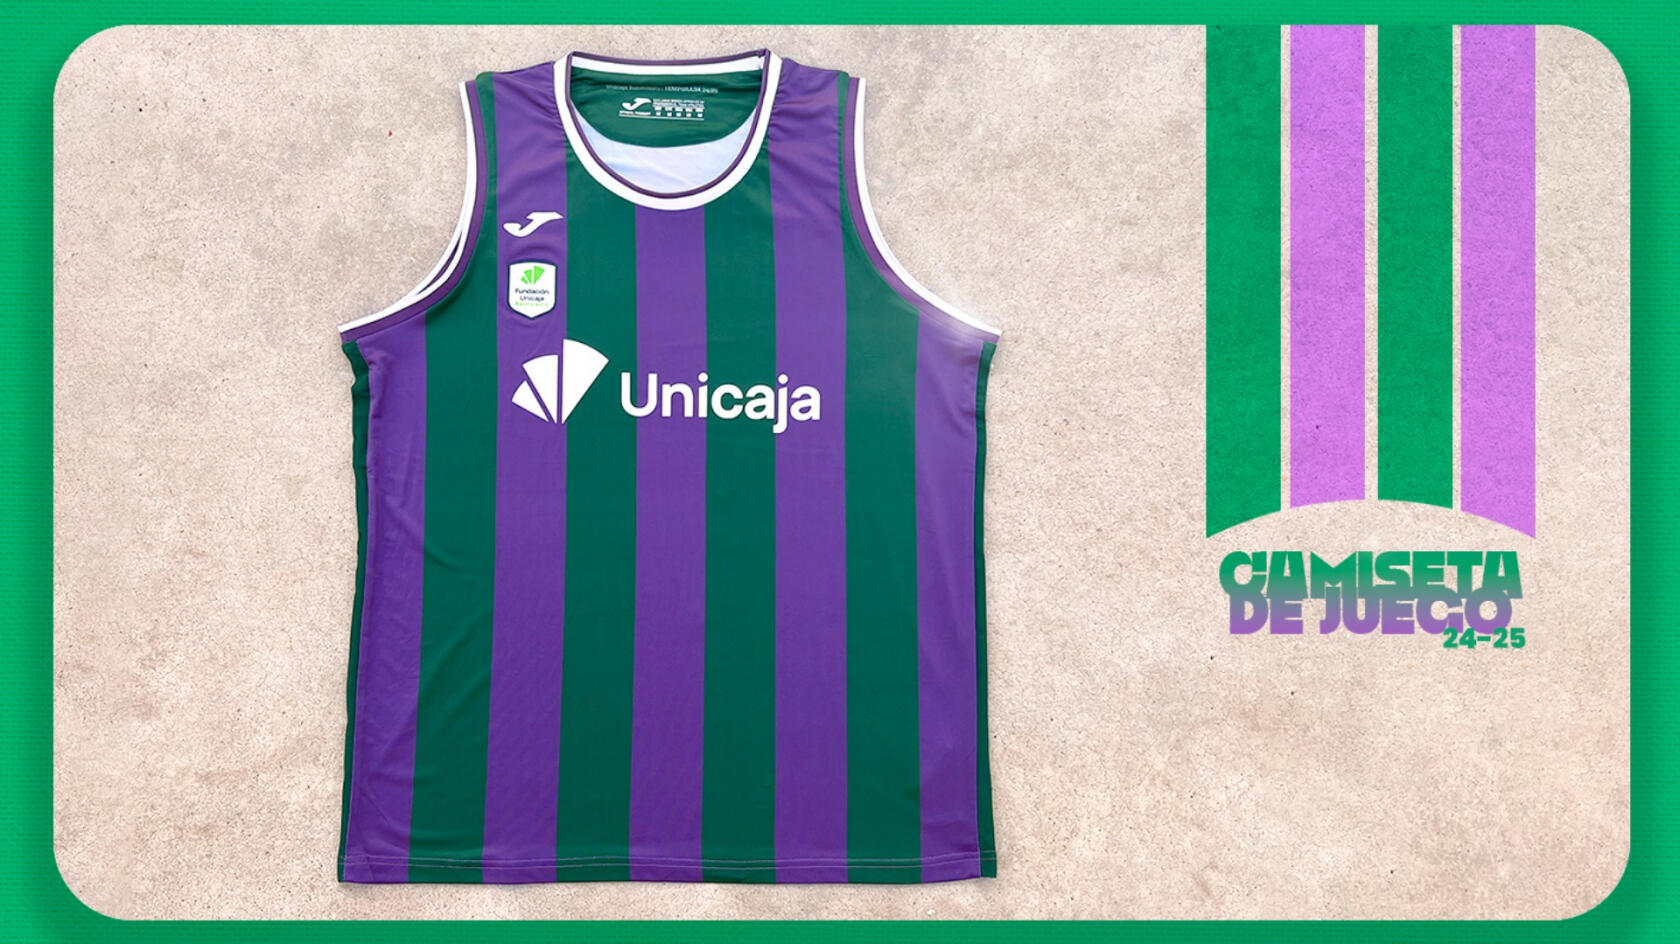 Traditional and groundbreaking, the new Unicaja shirt